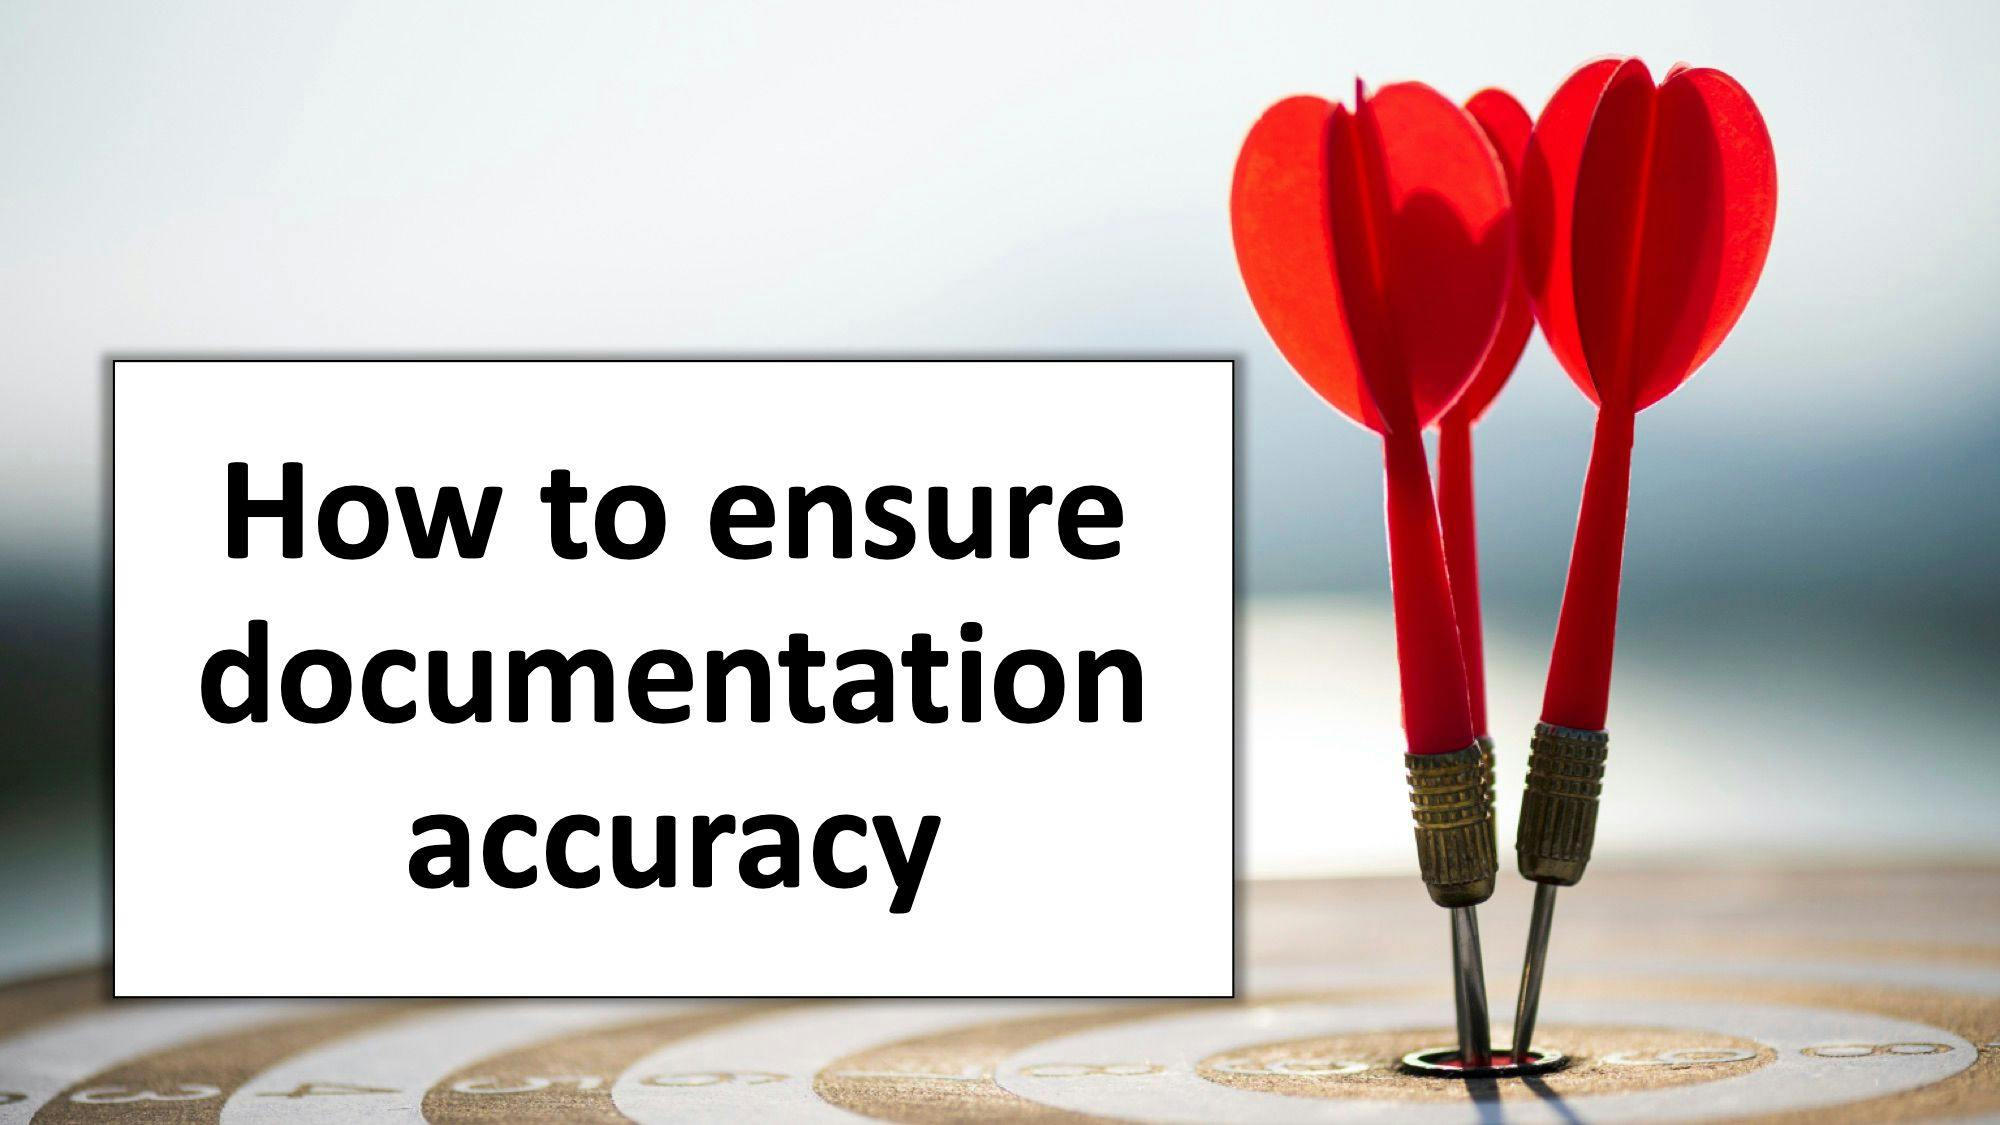 How to ensure documentation accuracy